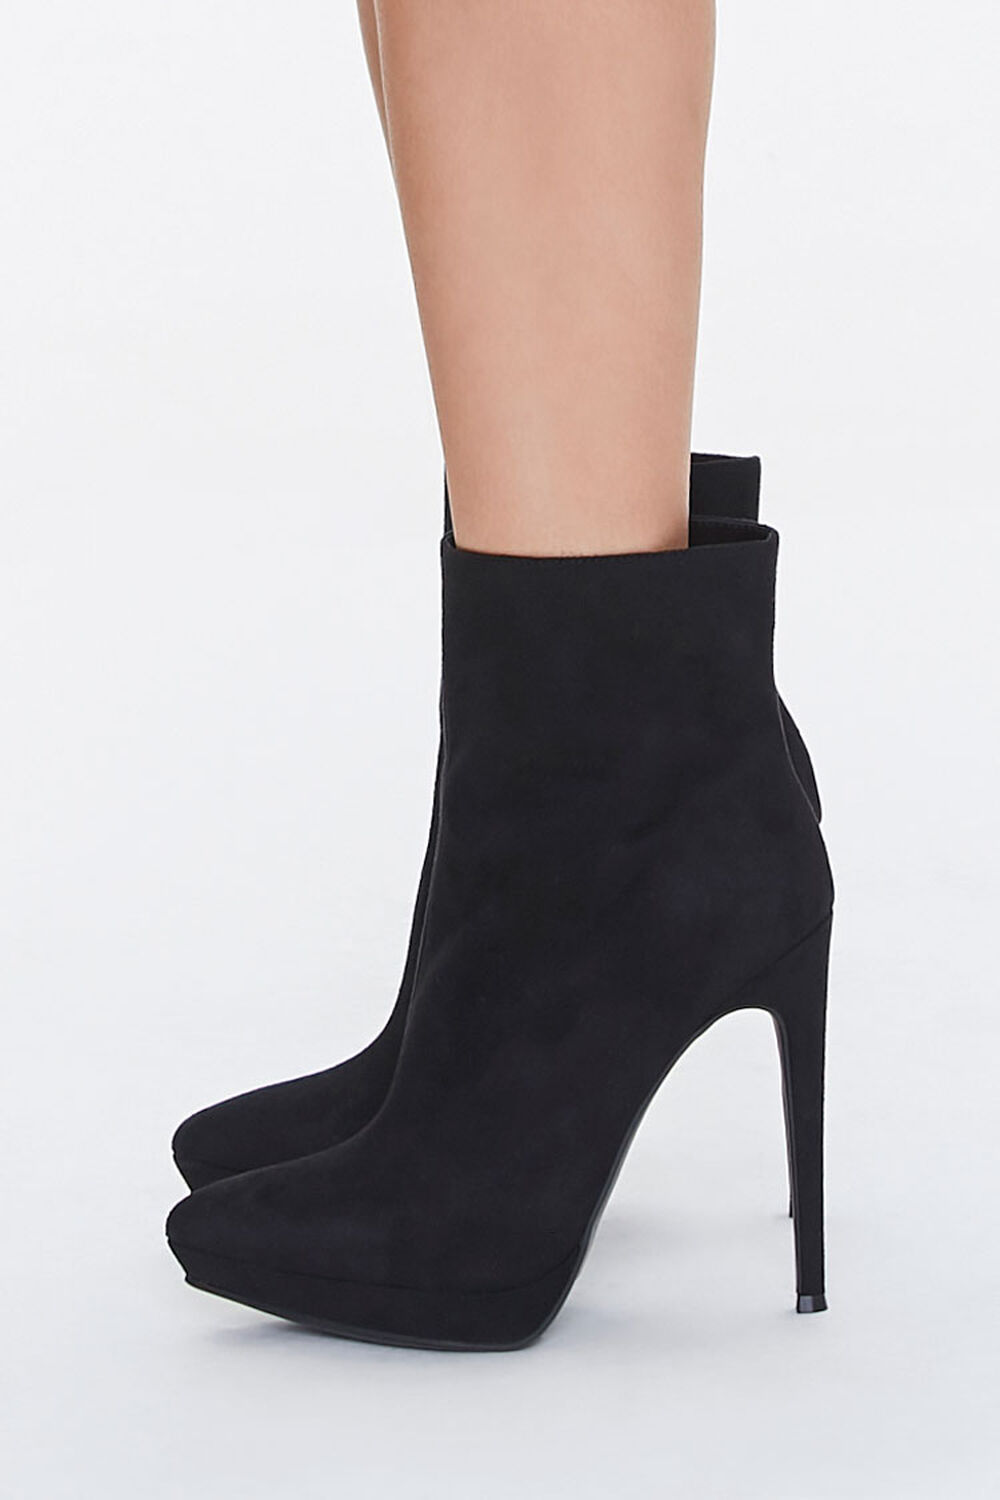 Faux Suede Stiletto Booties, image 2